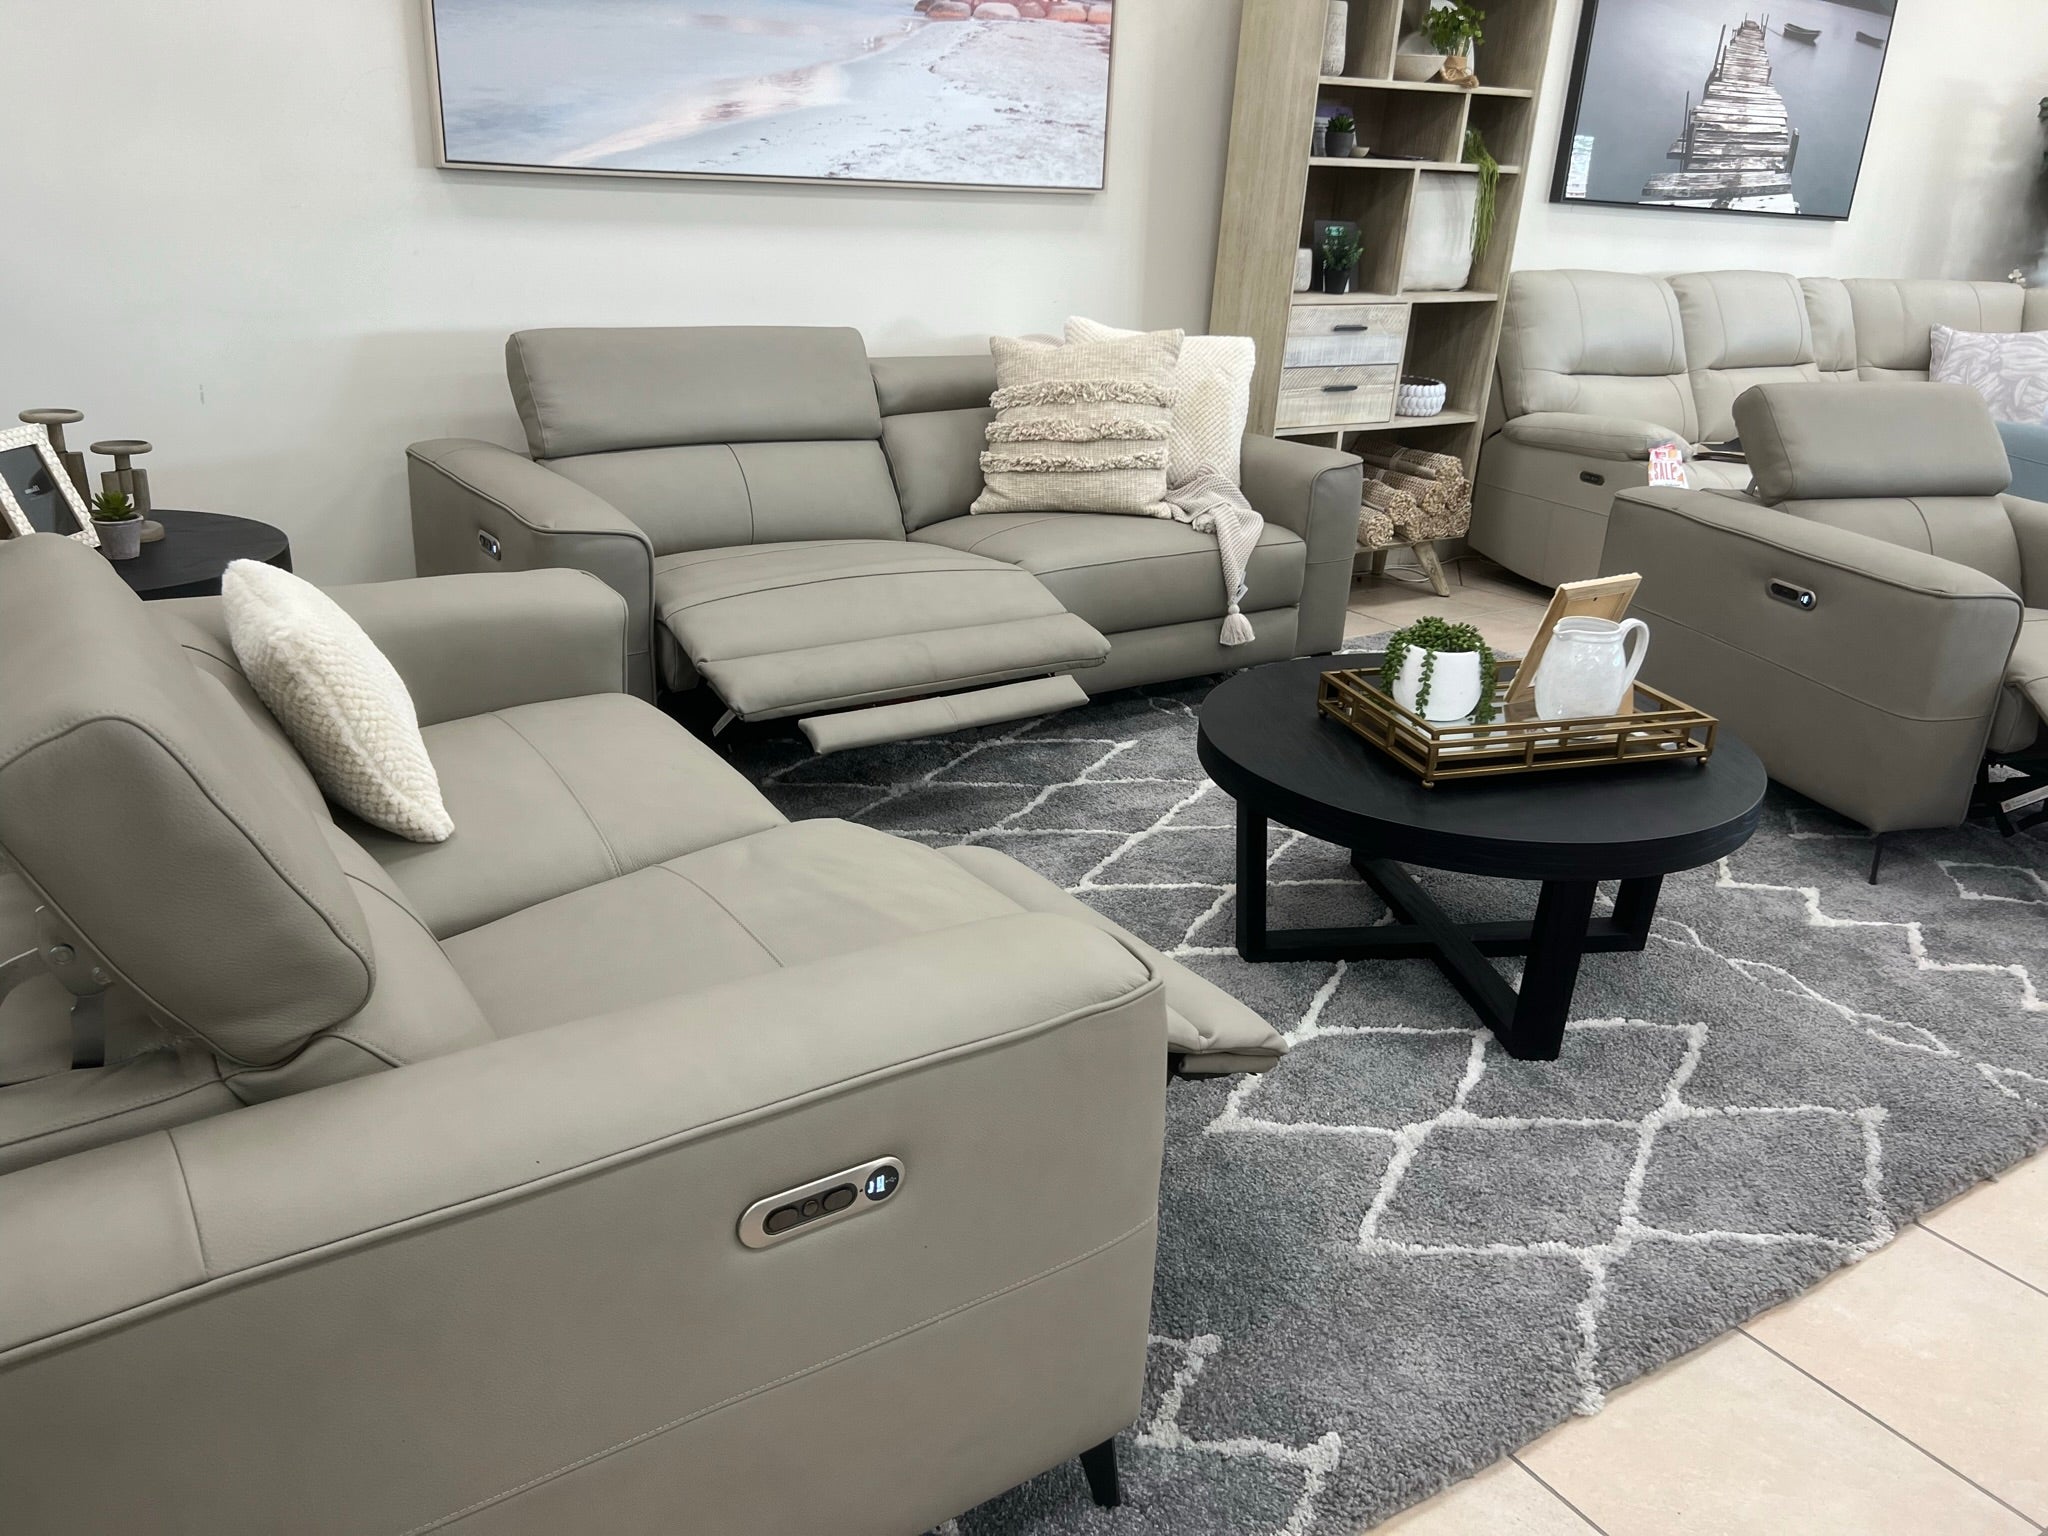 Luisa 3 Seater Recliner In Taupe Grey